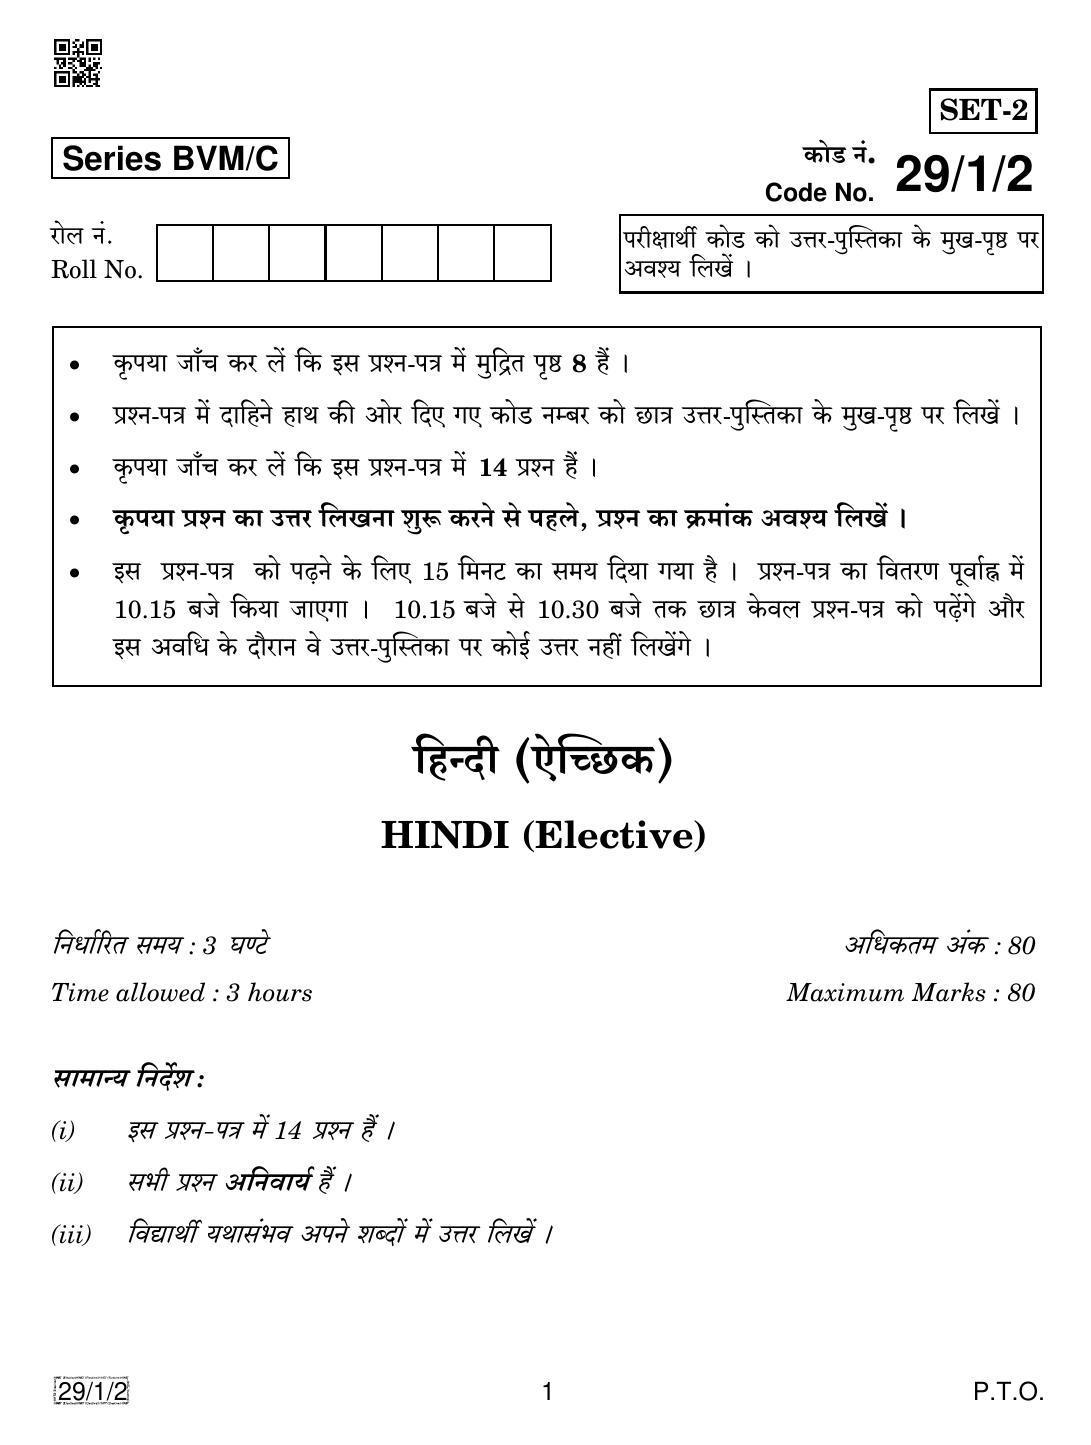 CBSE Class 12 29-1-2 HINDI ELECTIVE 2019 Compartment Question Paper - Page 1